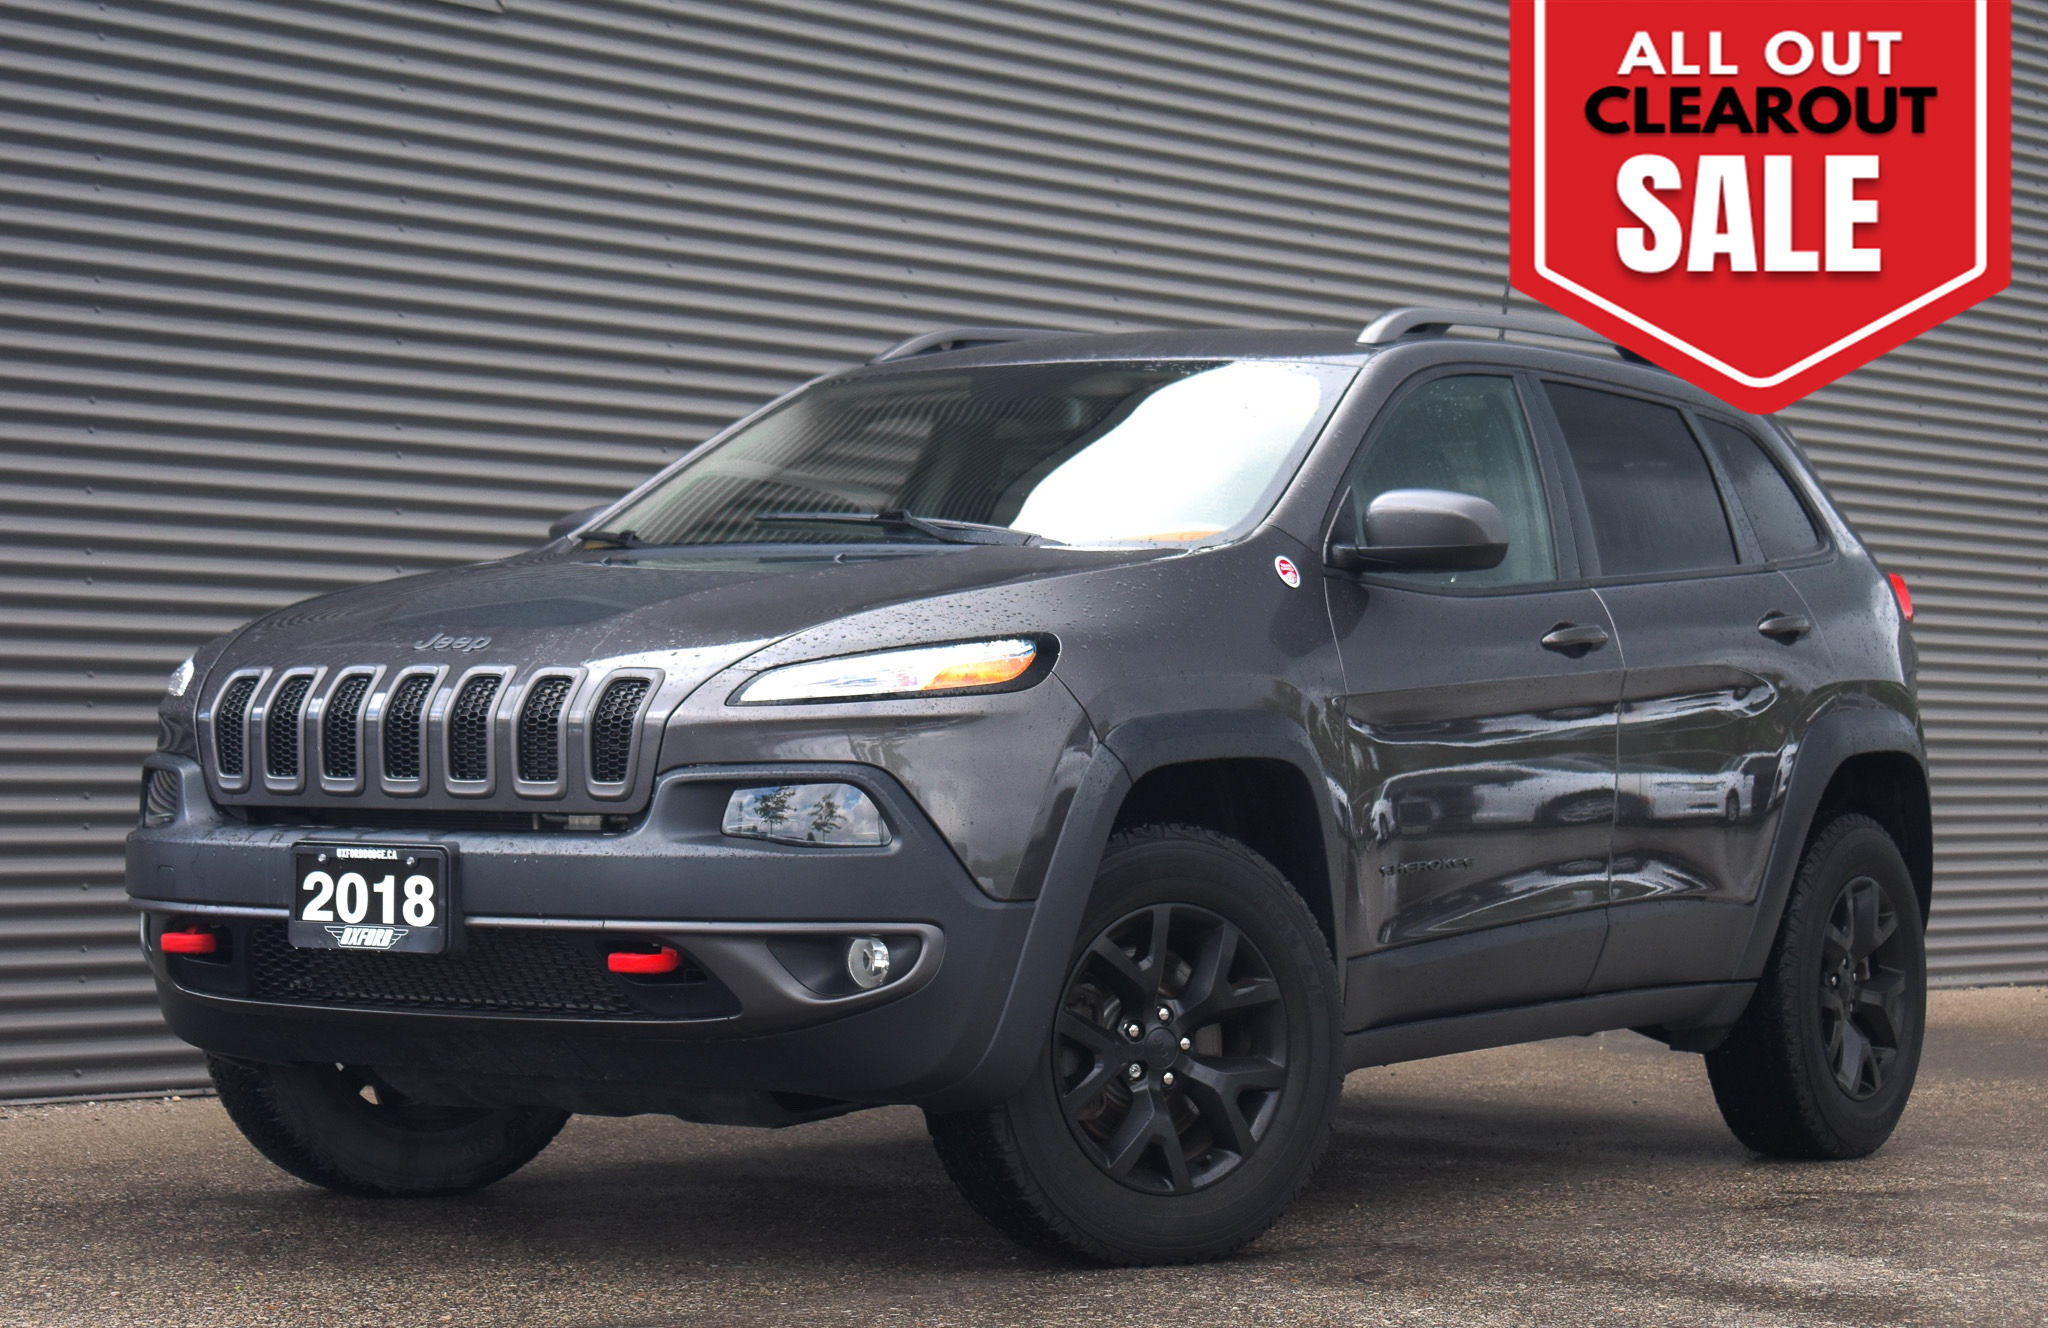 2018 Jeep Cherokee Trailhawk Well Maintained, Highly Equipped,  Off R